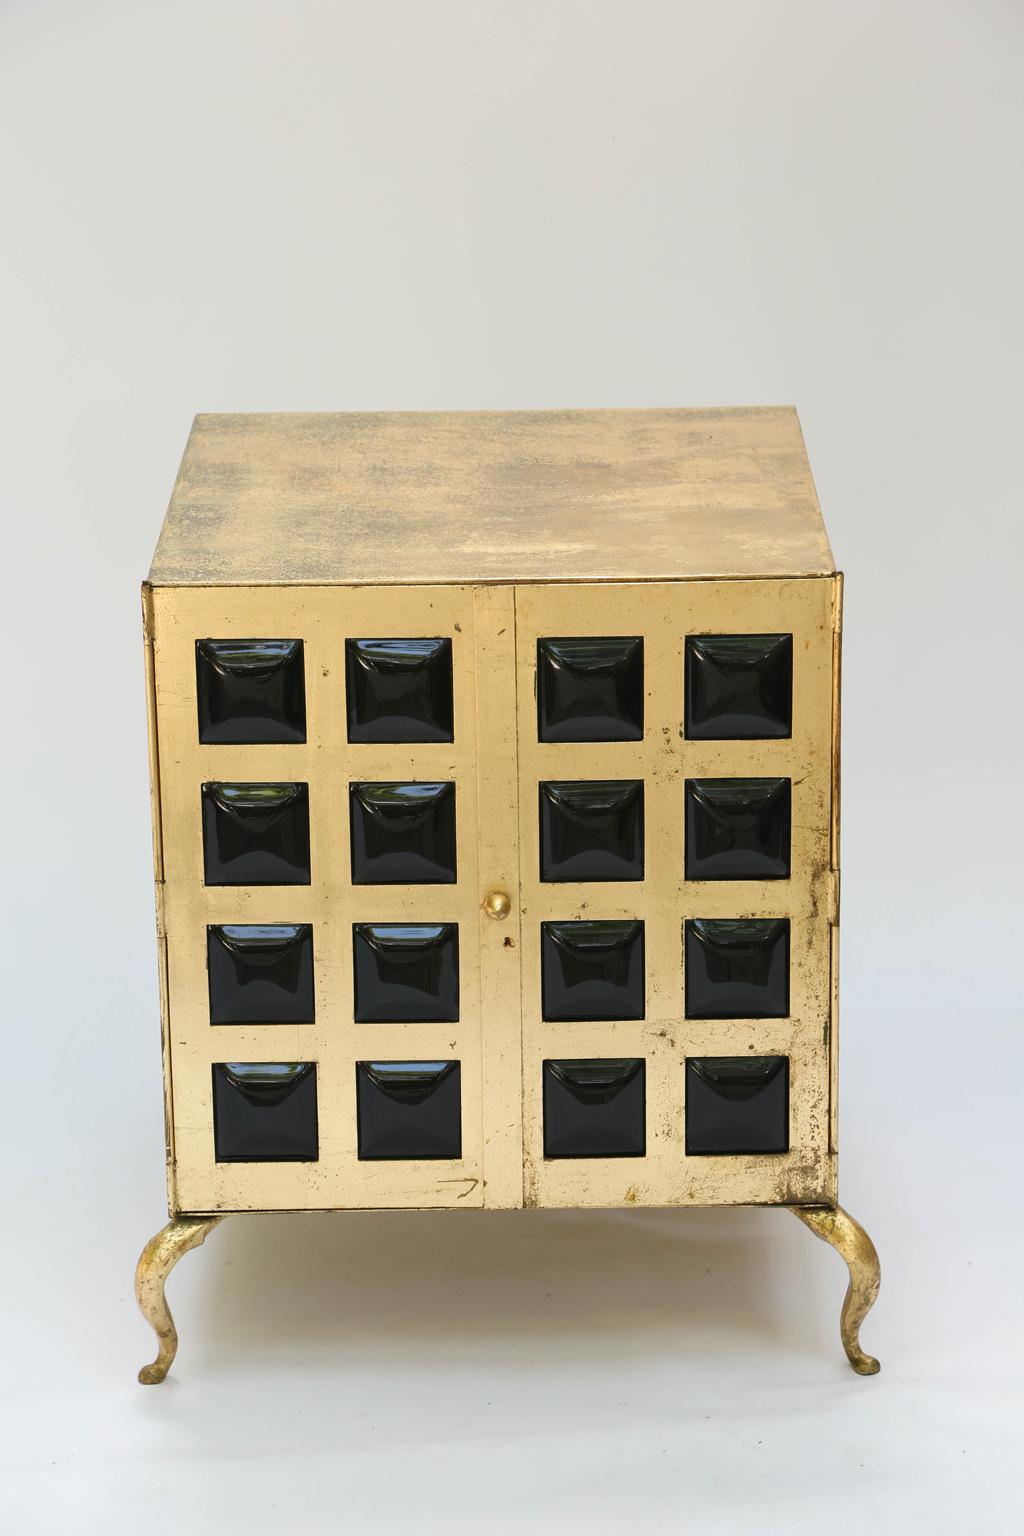 Unusual pair of end tables, each a cabinet of gilt metal, its double doors with grille fronts, inset with 